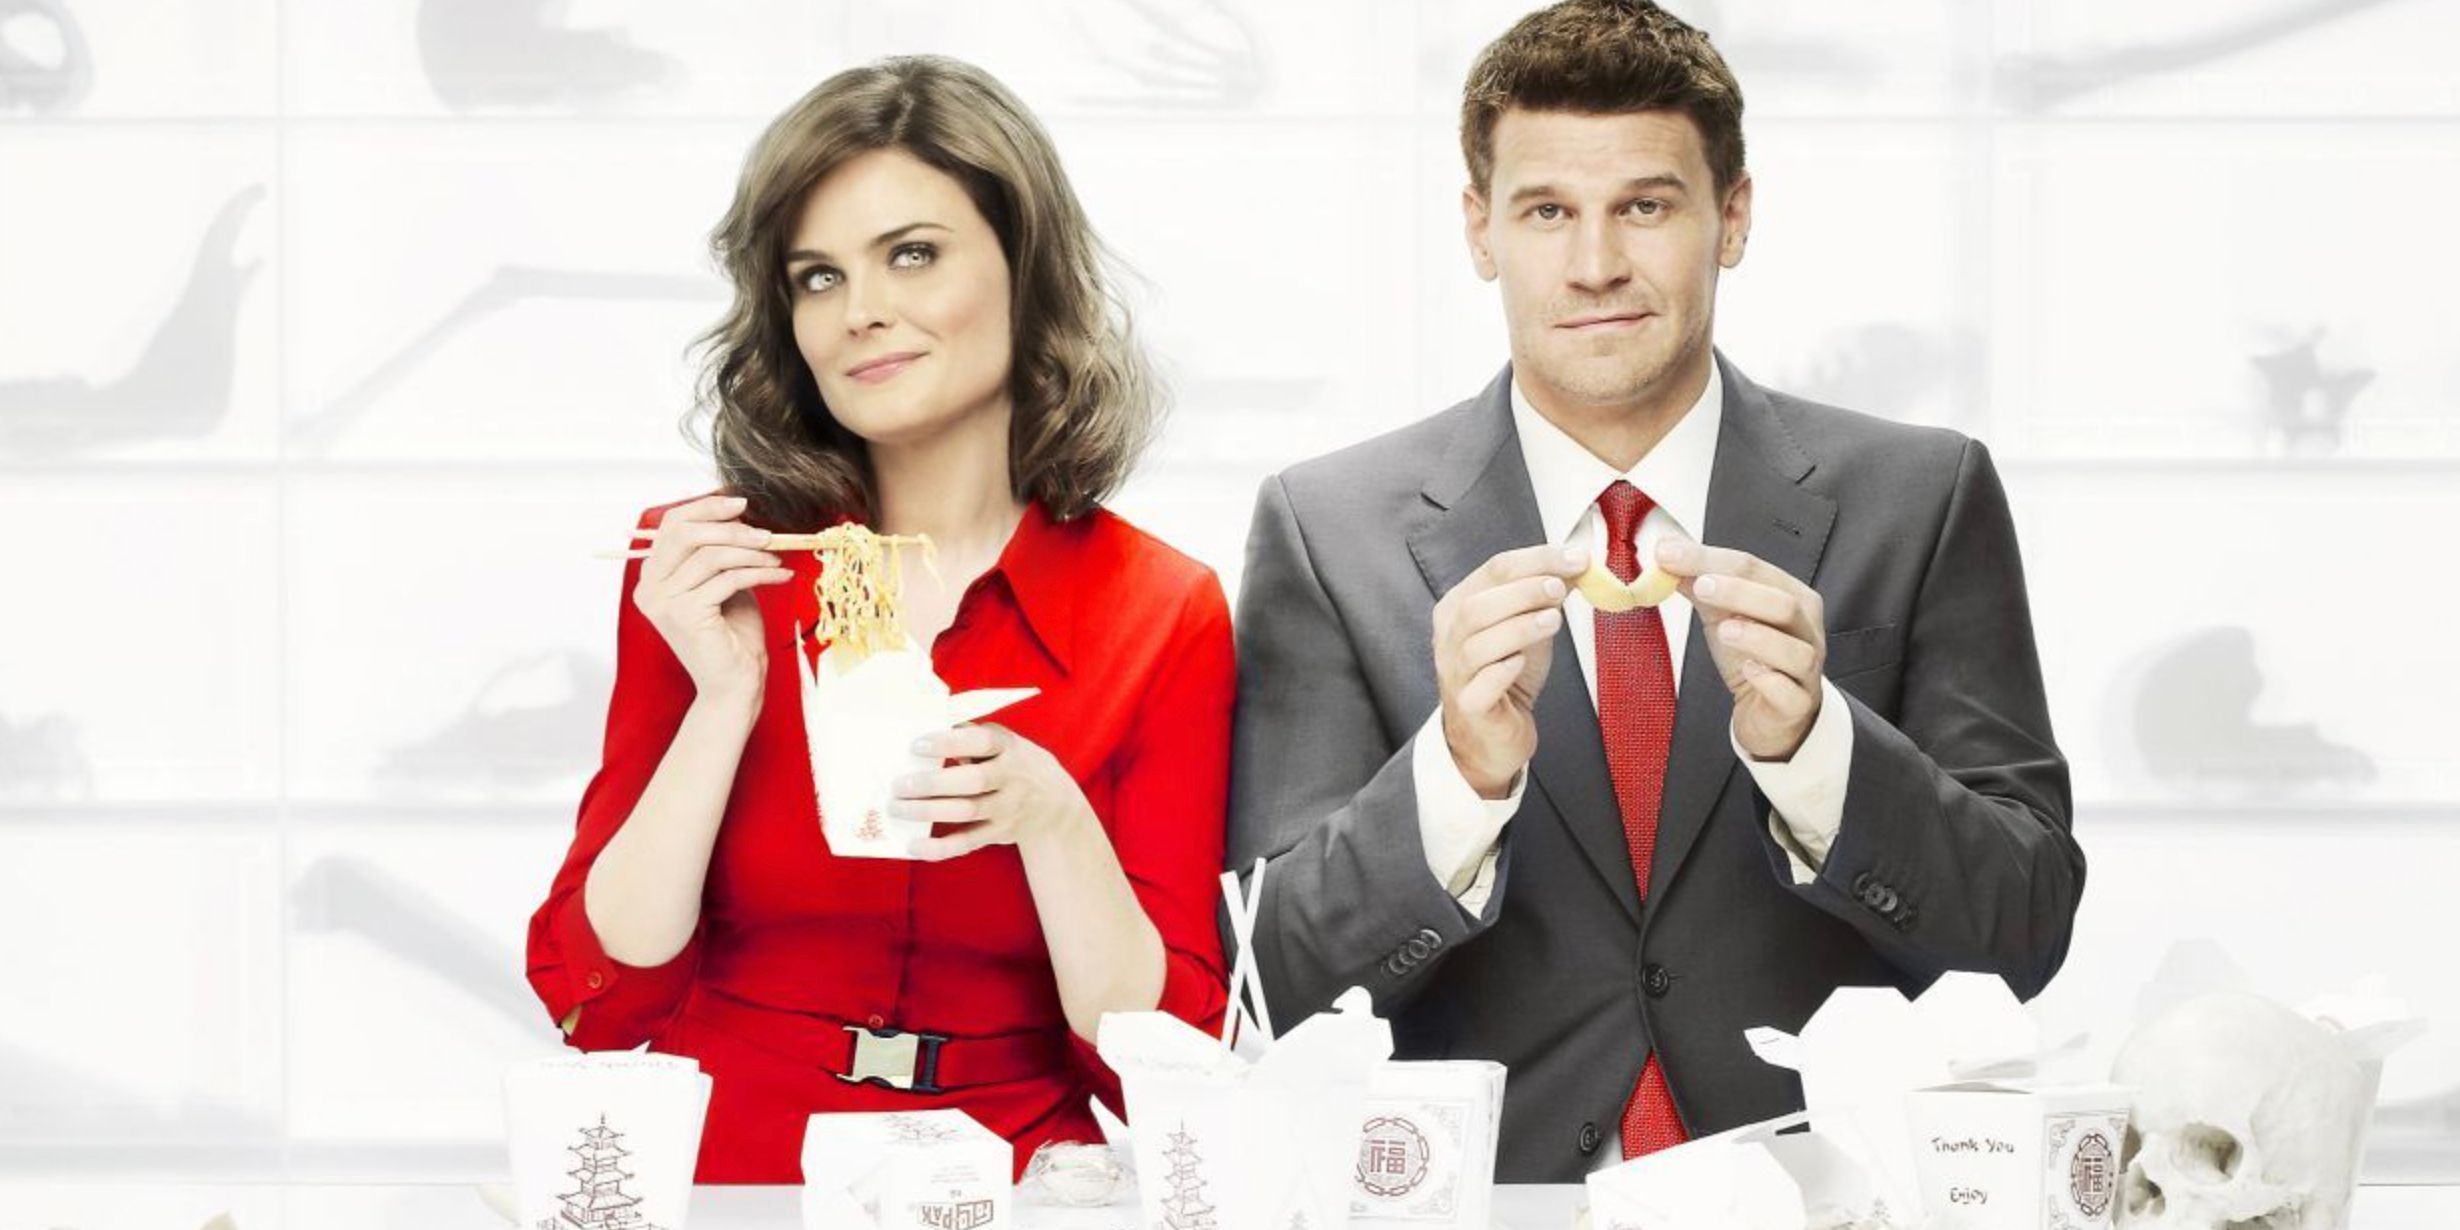 Bennan and Booth eating takeout in a Bones promotional image